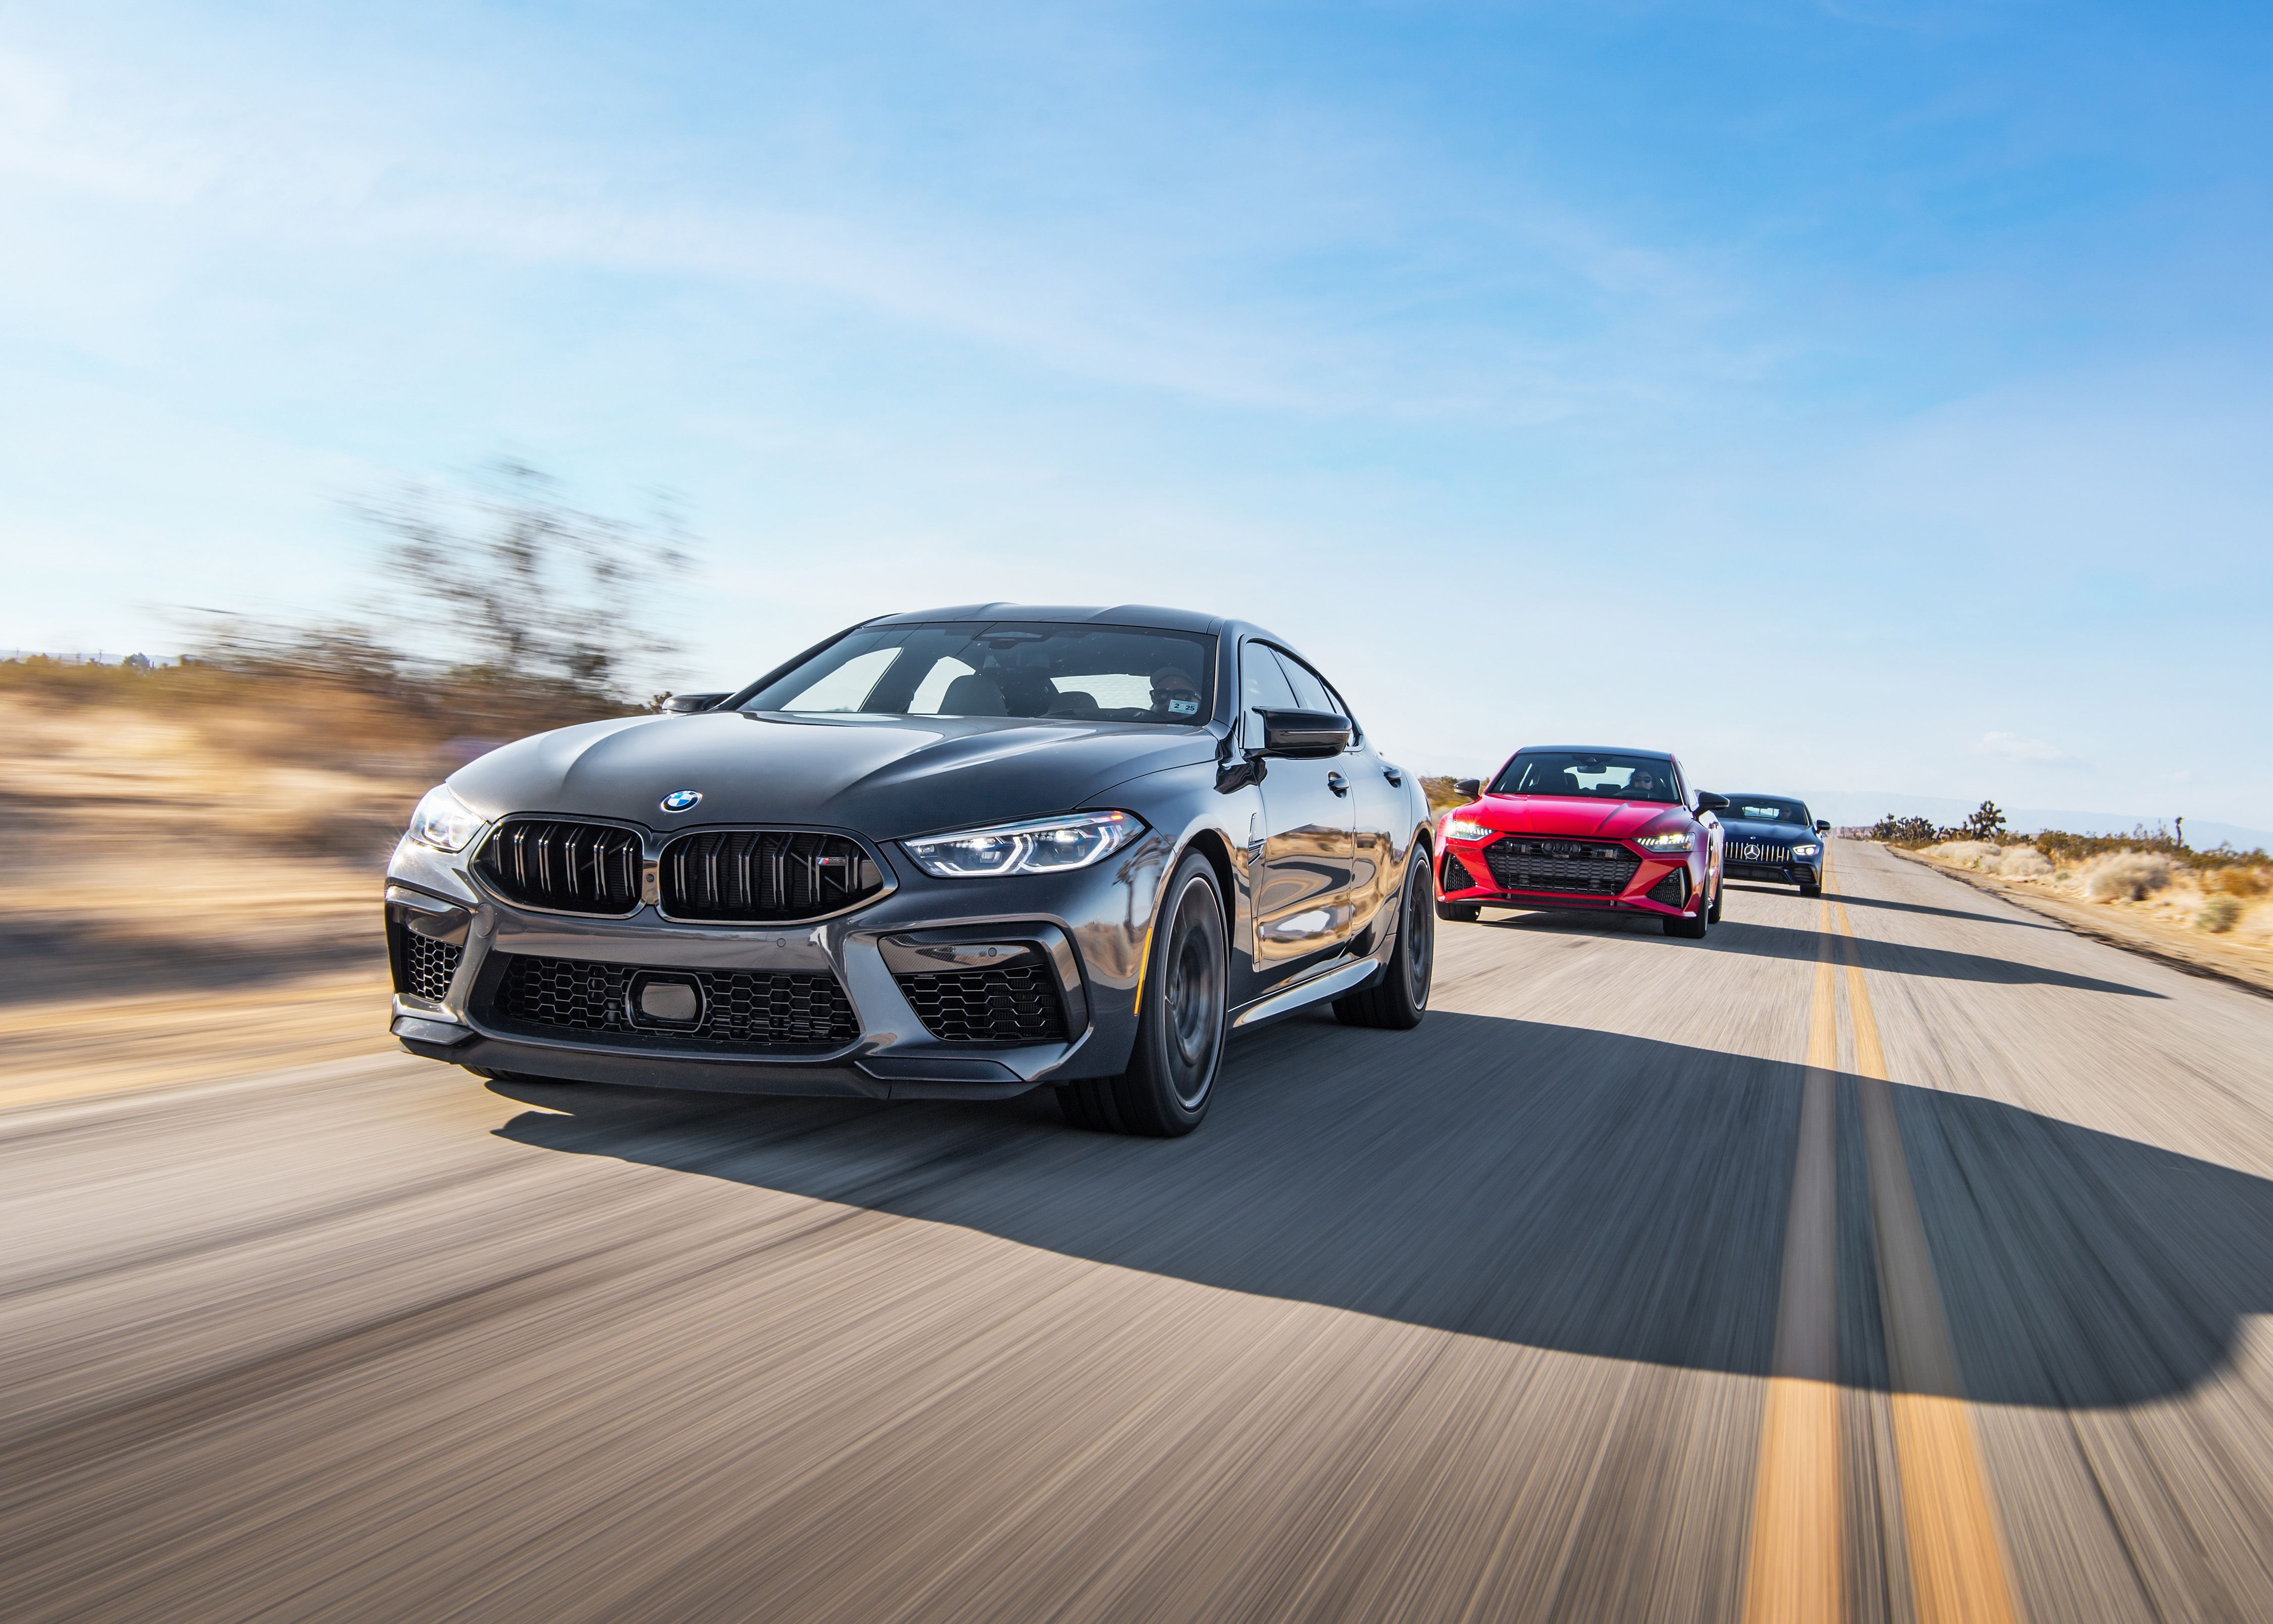 Tested 21 Audi Rs7 Vs Bmw M8 Gc Vs Mercedes Amg Gt63 S